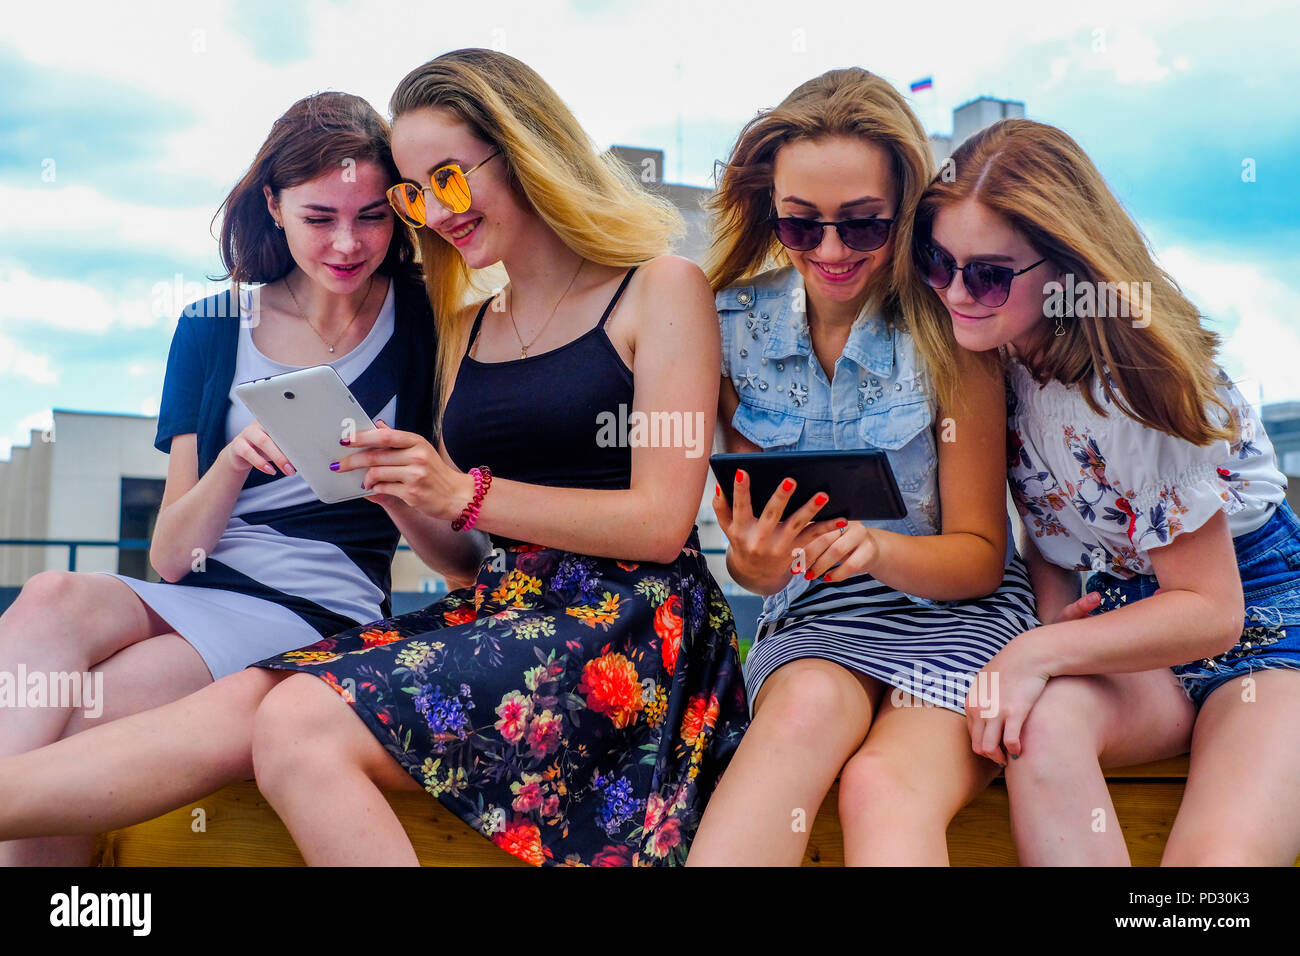 Friends on vacation using digital tablet Stock Photo